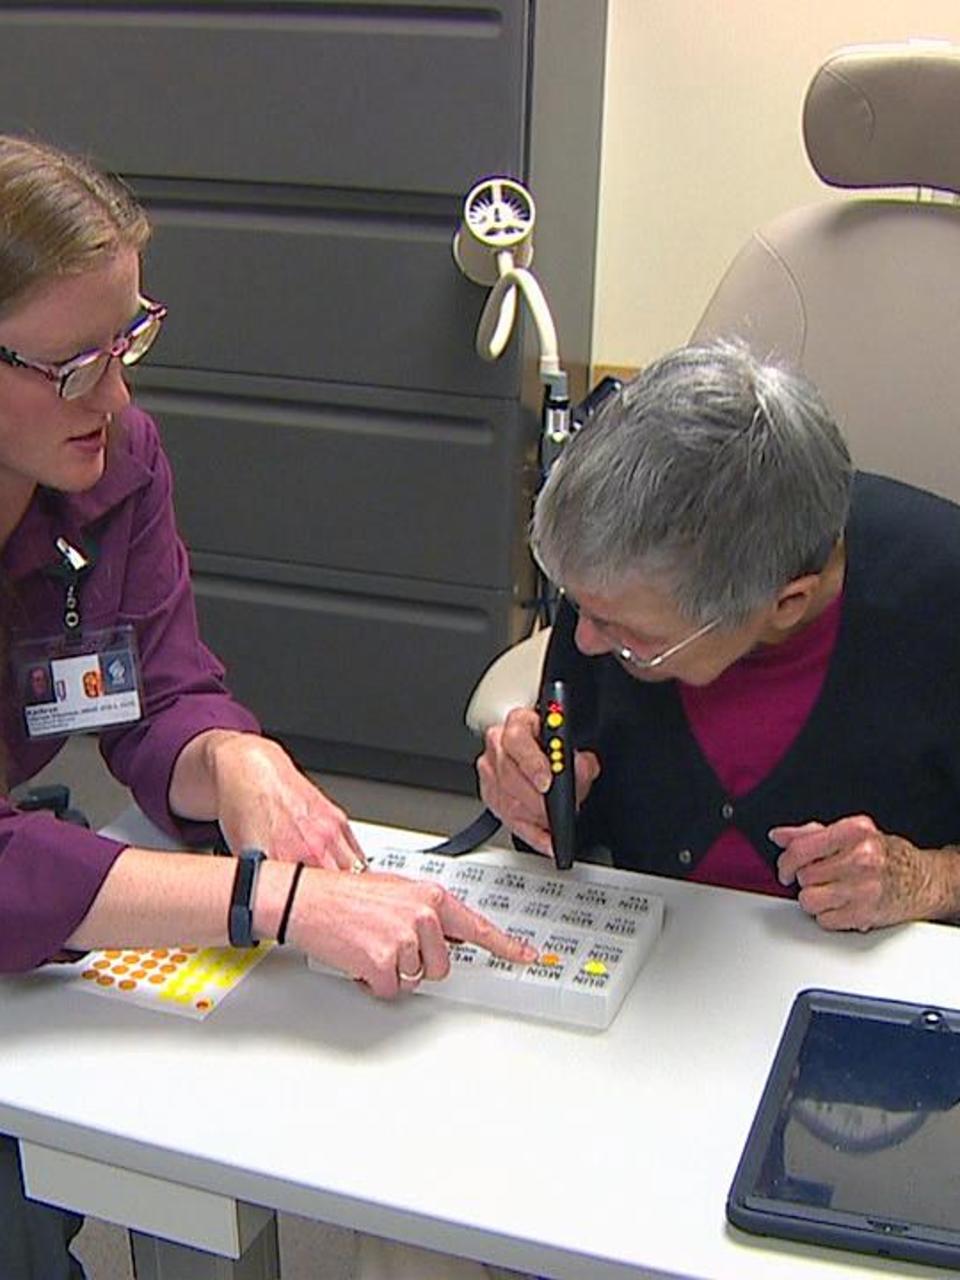 Ohsu Touts Low Vision Therapist Who Understands Patients Better